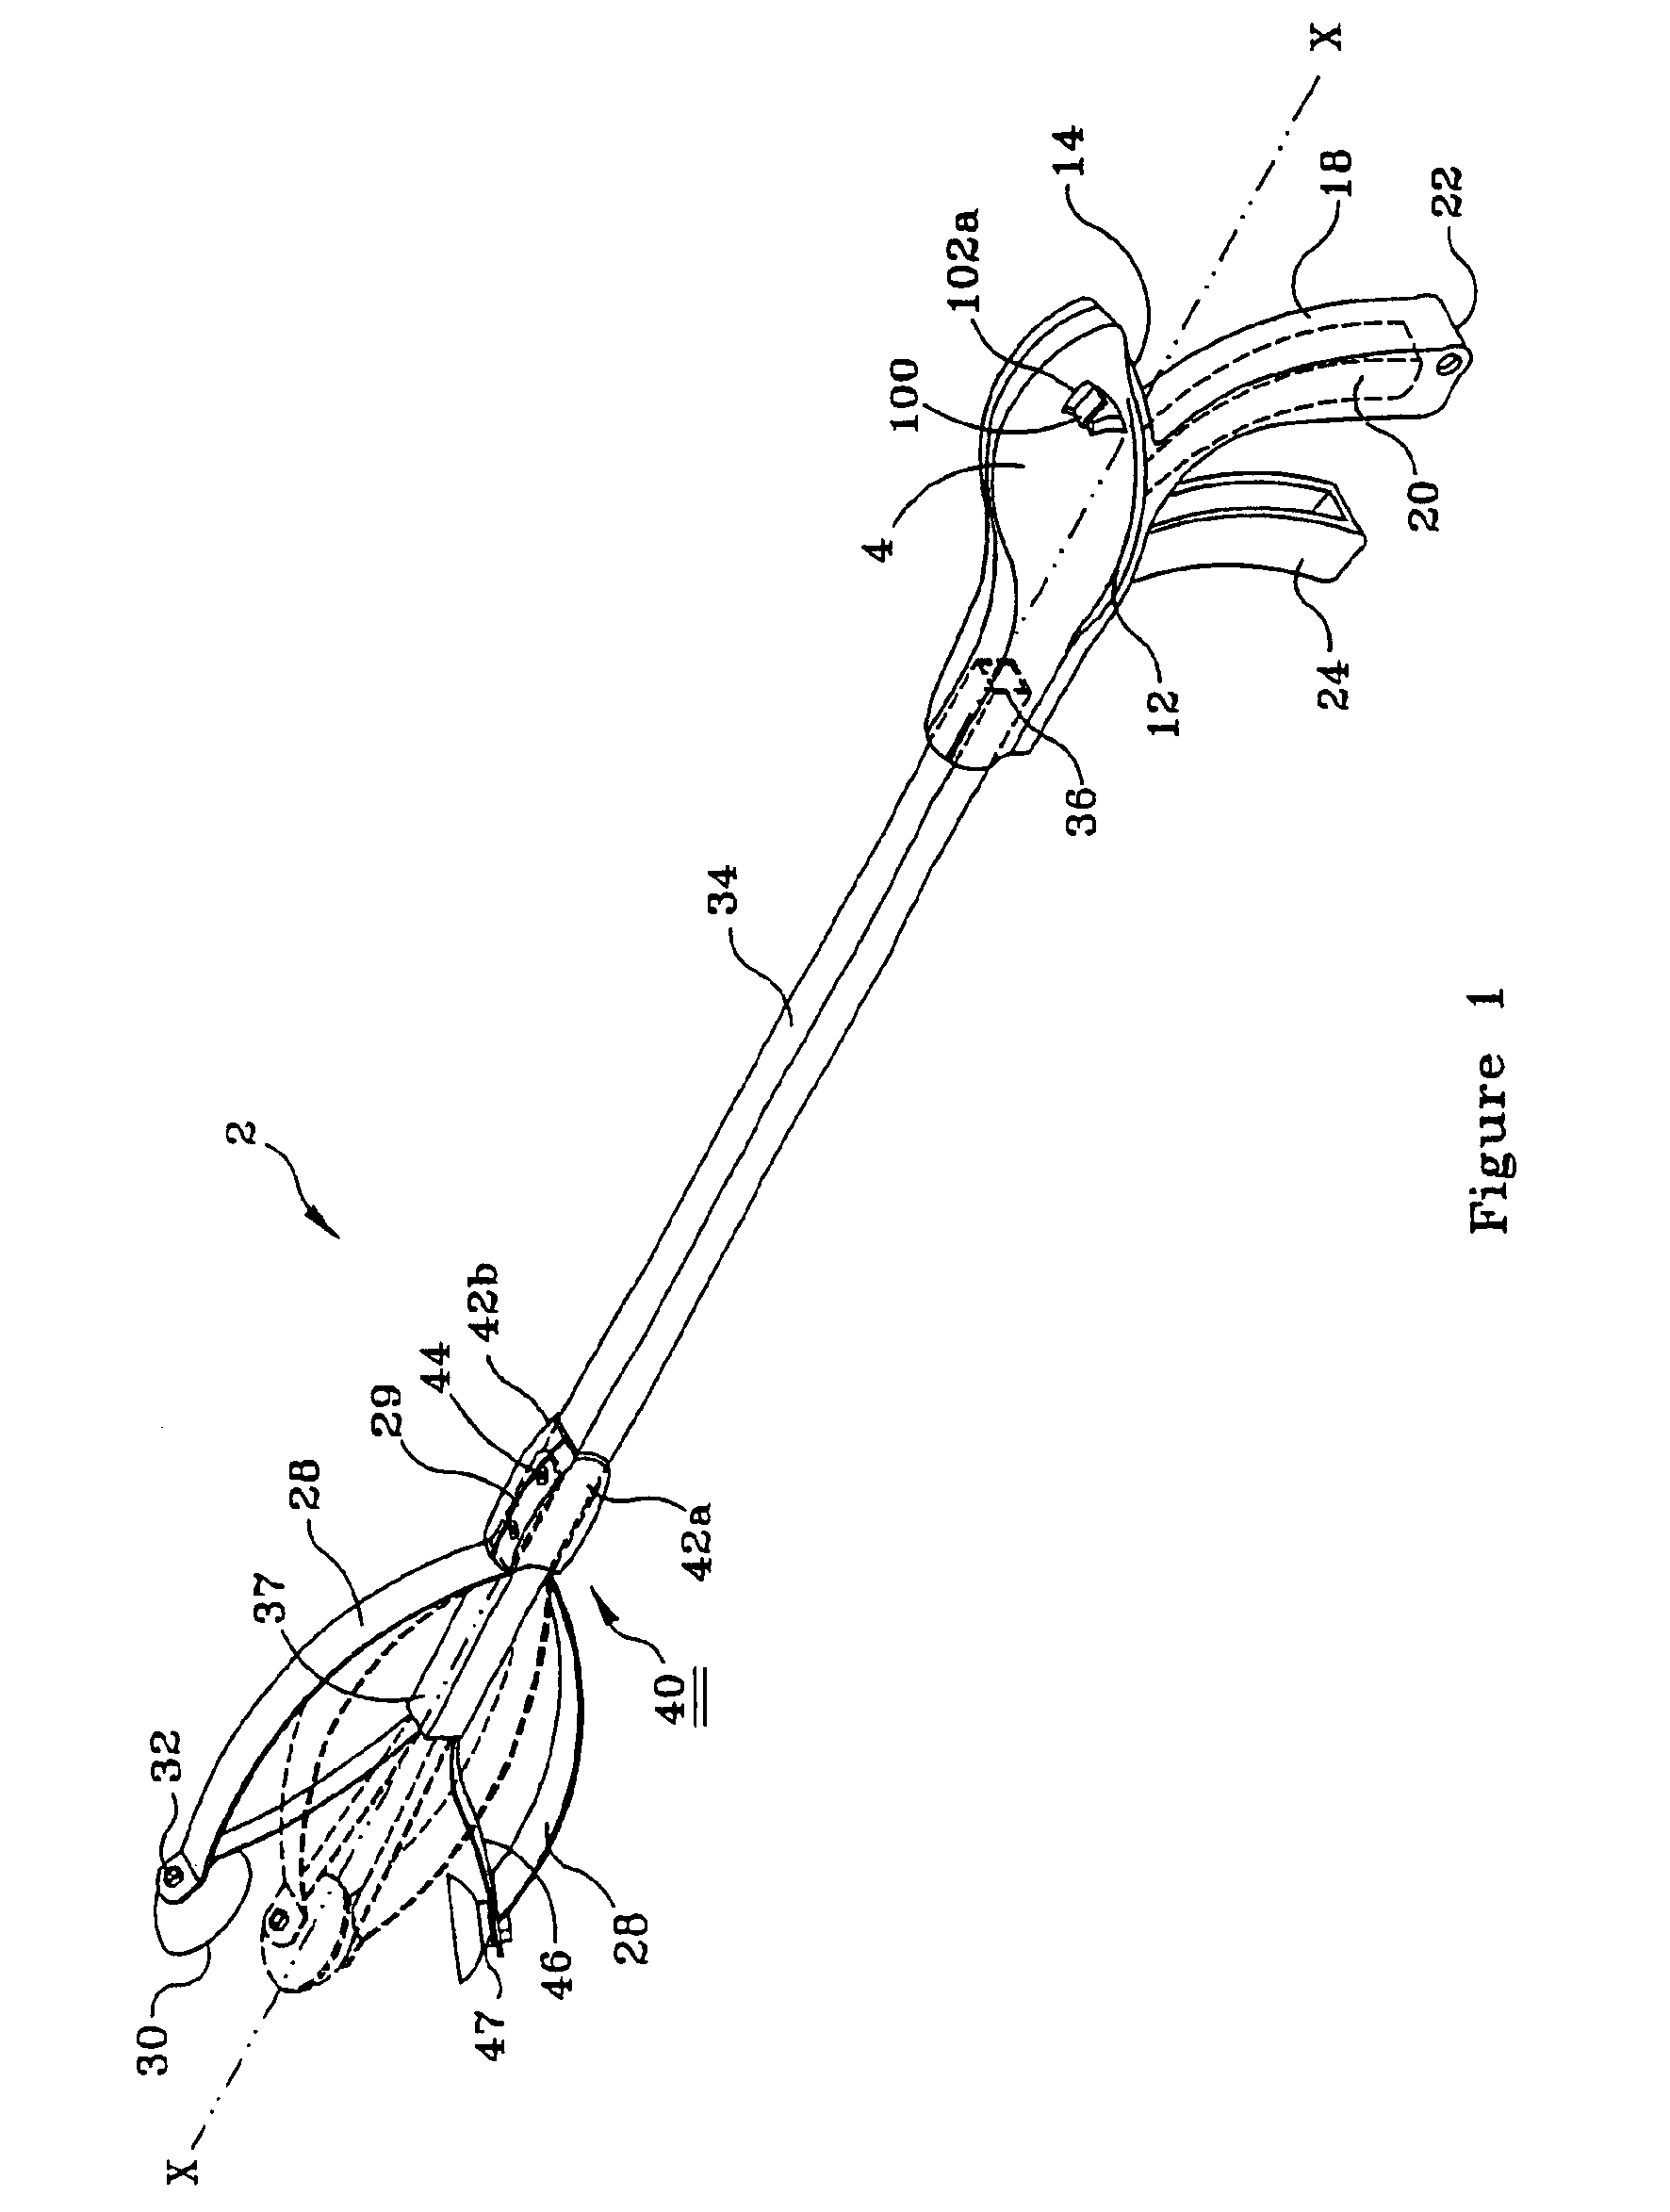 Pickup tool with variable position limiting and variable axis of operation